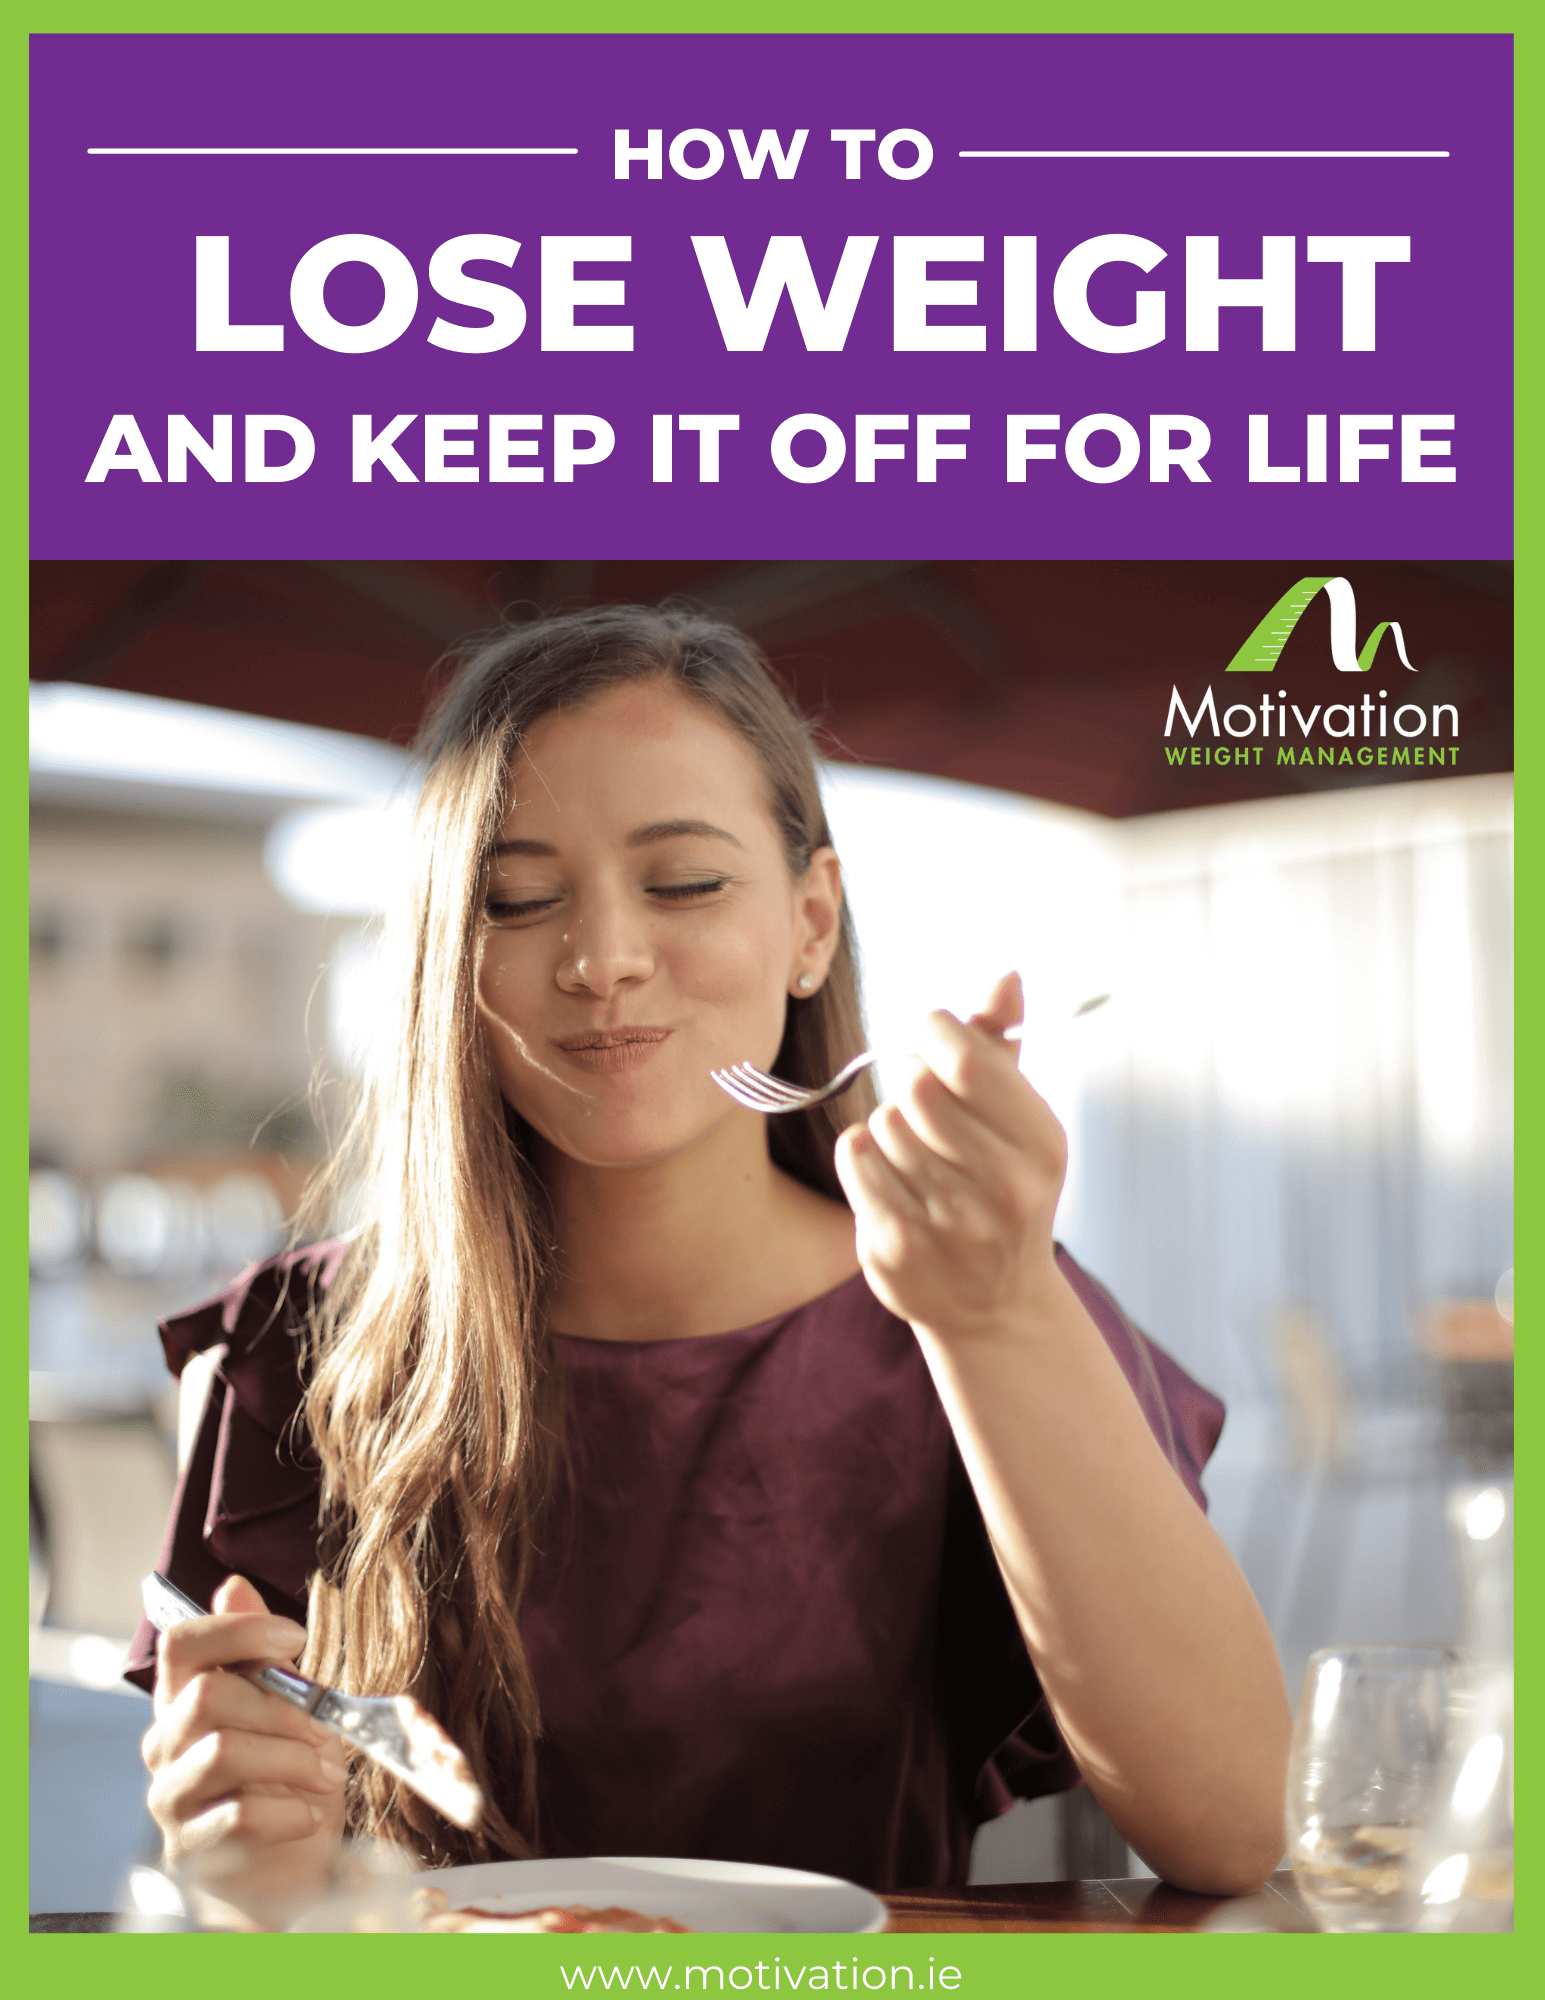 How To Lose Weight And Keep It Off For Life